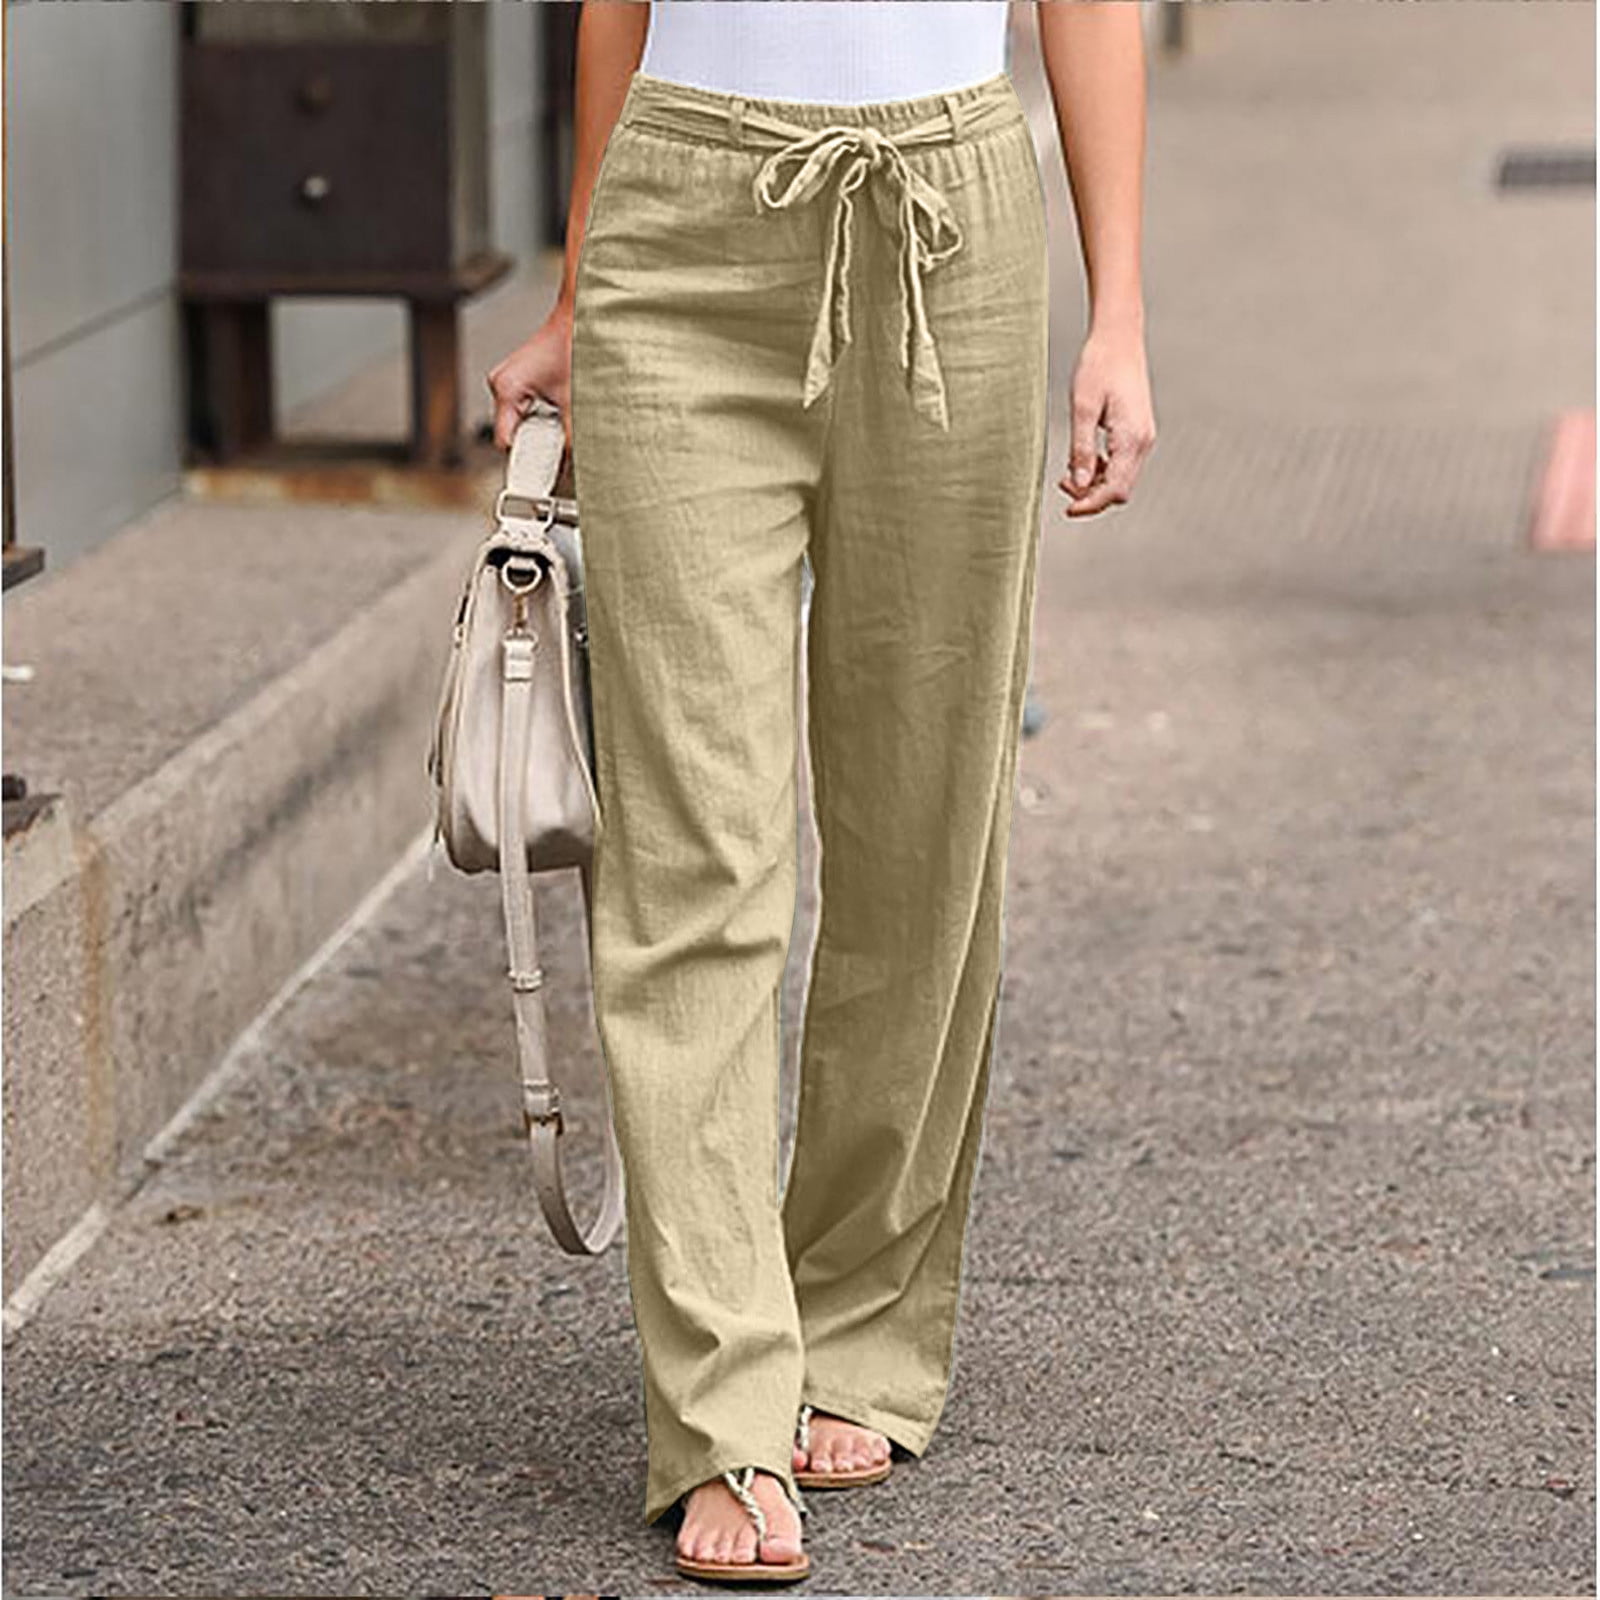 I'm Passing on Jeans This Summer—16 Chic Trousers I'm Wearing Instead |  Summer outfit inspiration, Summer outfits, Fashion